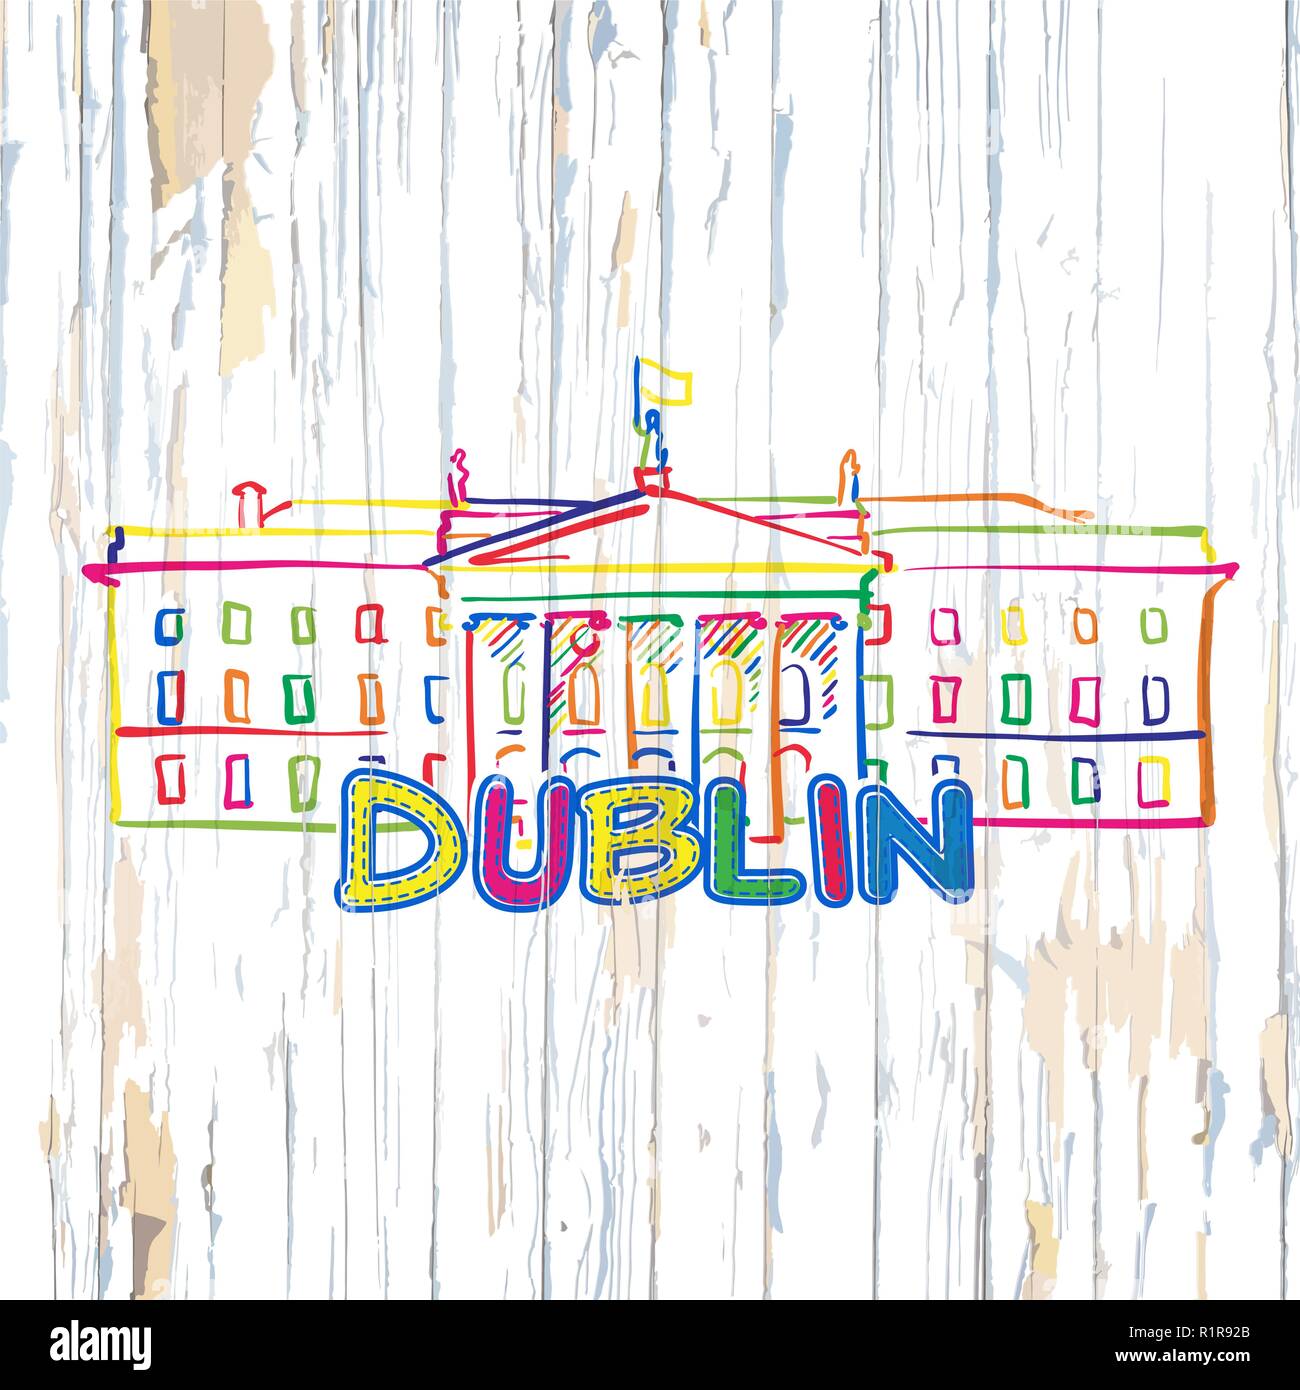 Water tower dublin Stock Vector Images - Alamy